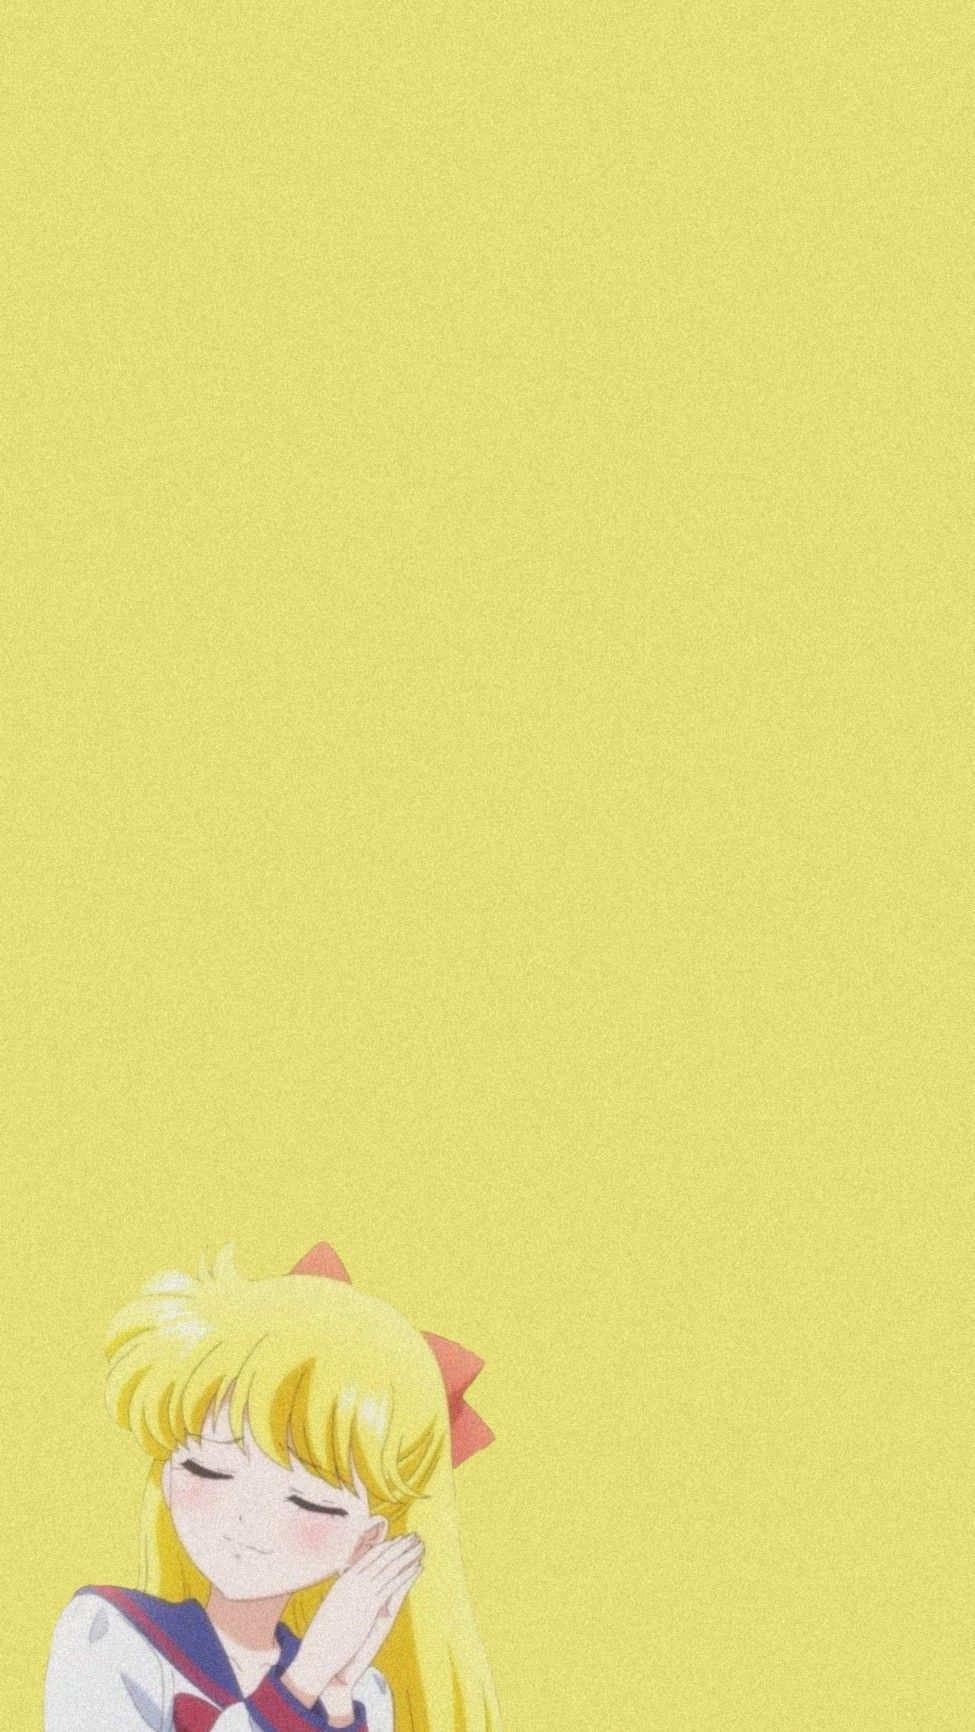 Sailor Moon anime wallpaper for iPhone with yellow background and sailor Jupiter character. - Sailor Venus